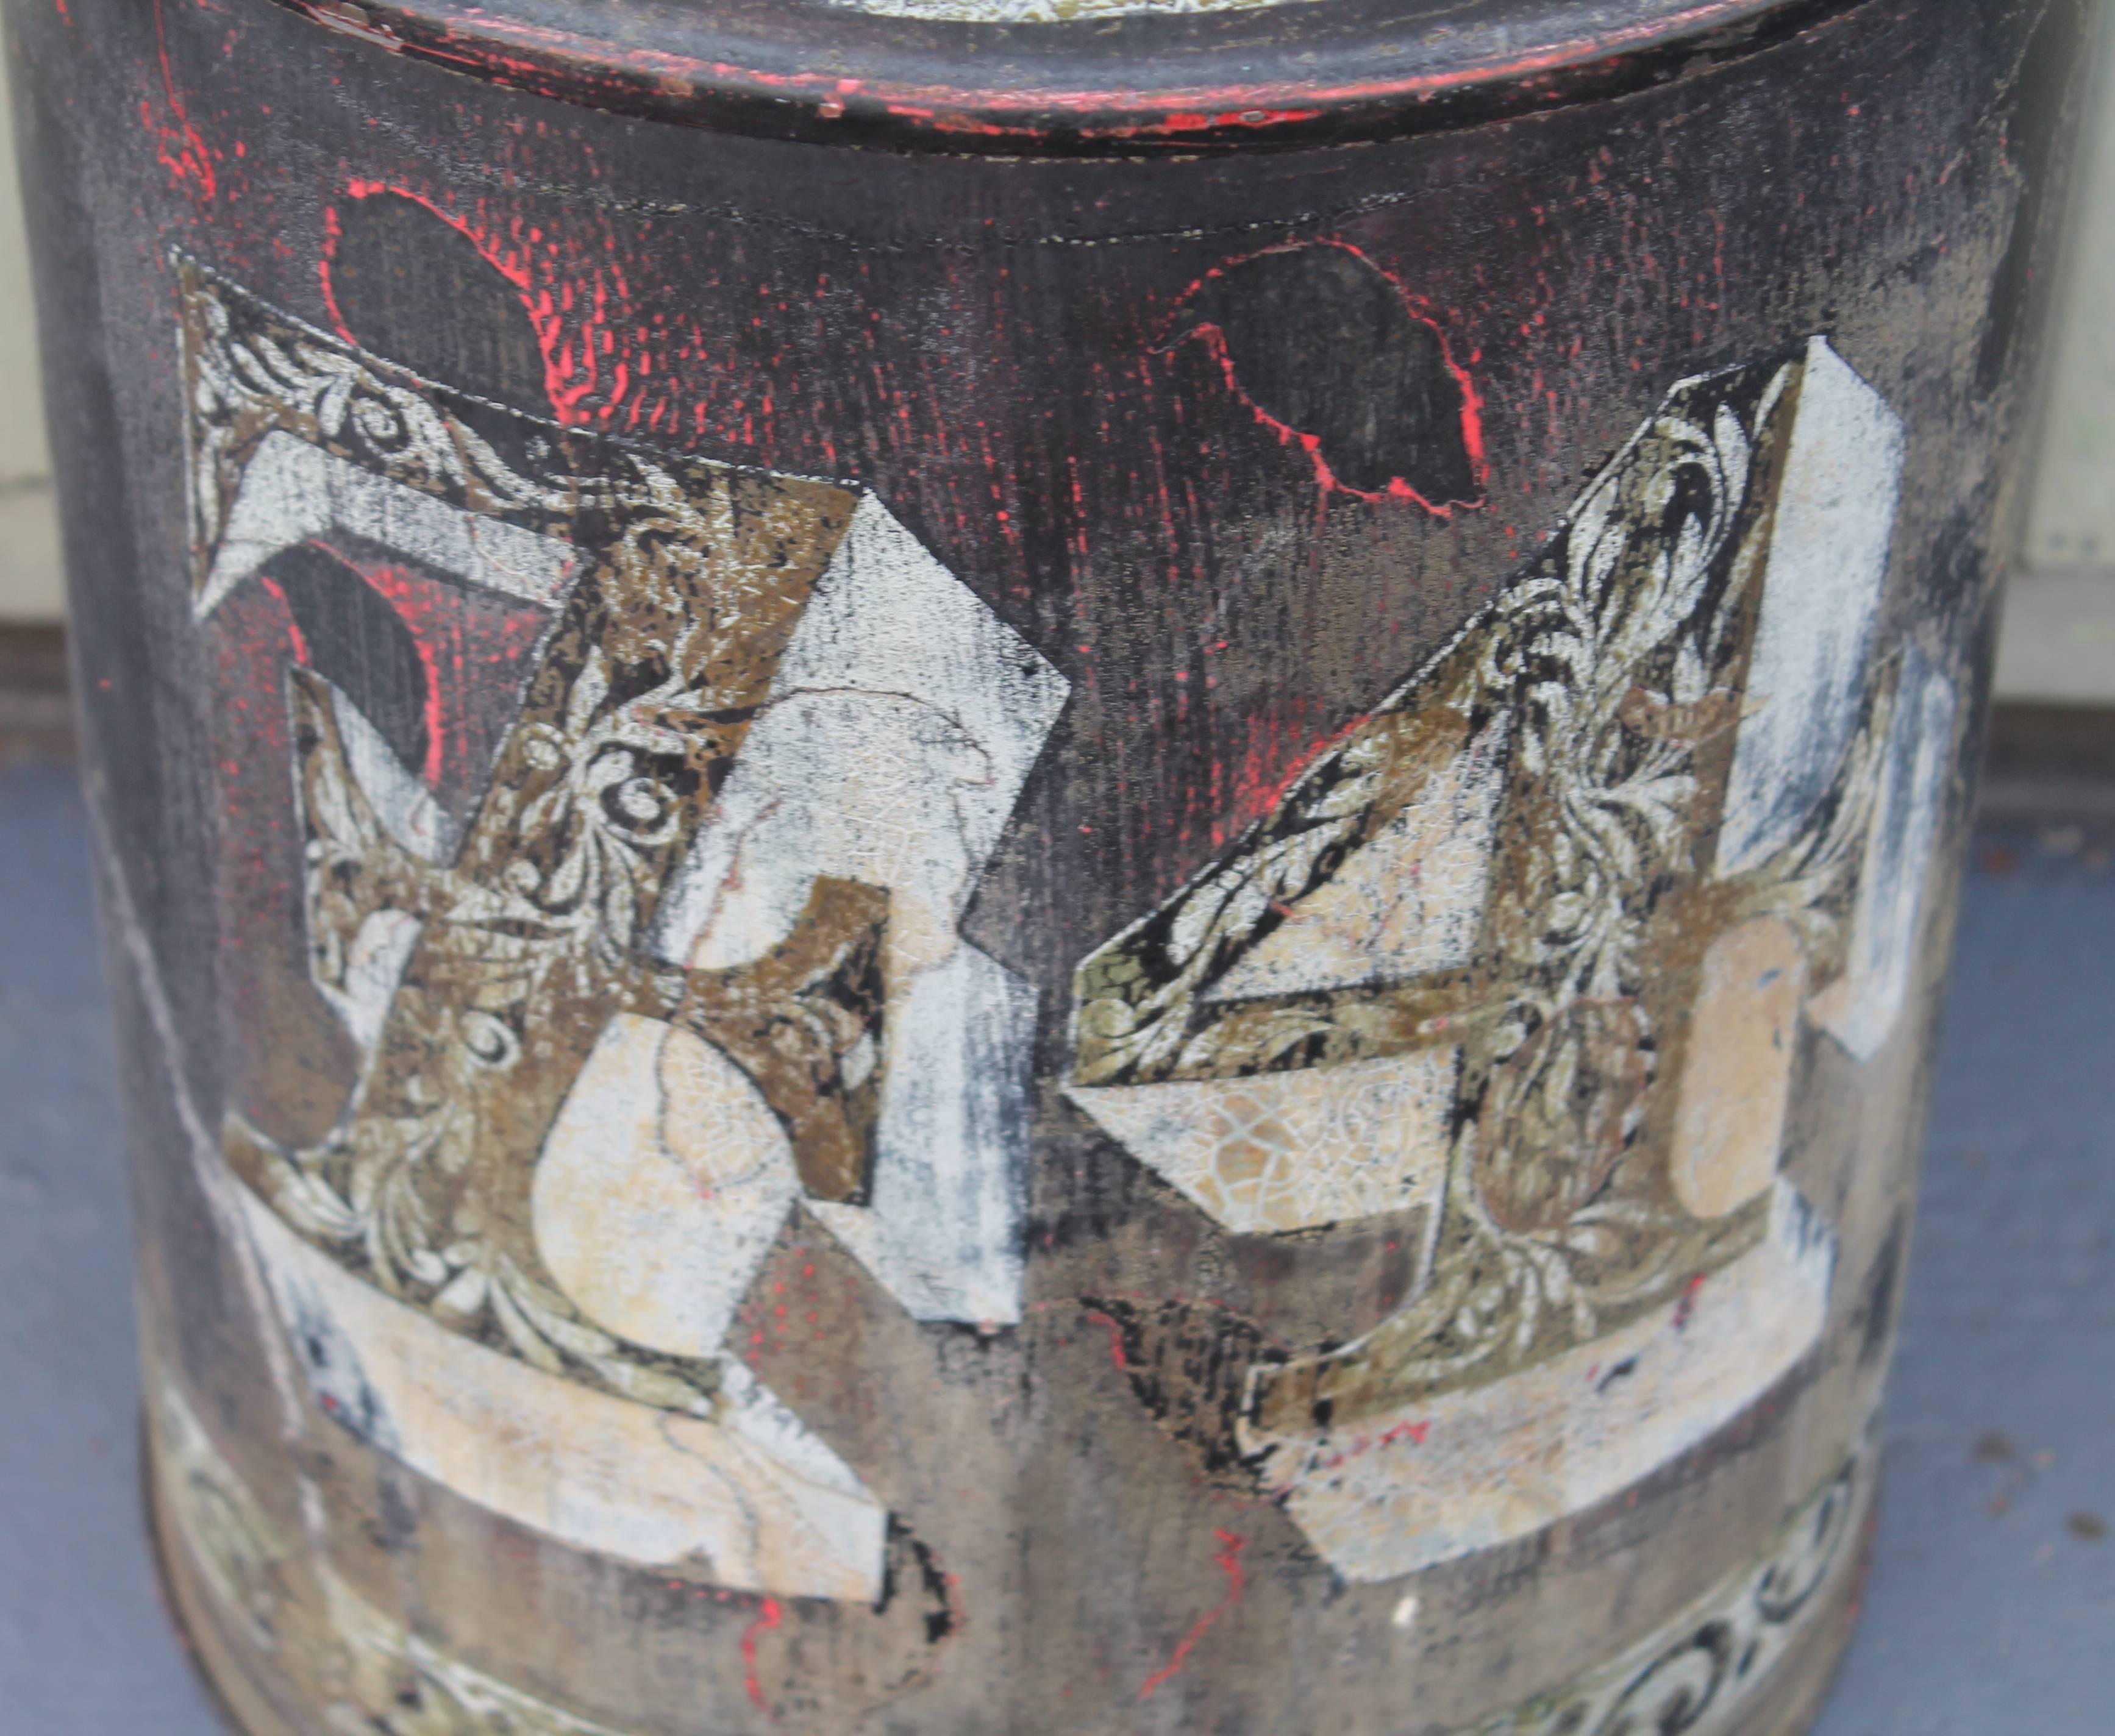 This early Primitive, original painted tin can has 74 painted on the face of the canister and has the original lid with a porcelain knob. Condition is very good and has a wonderful patina.